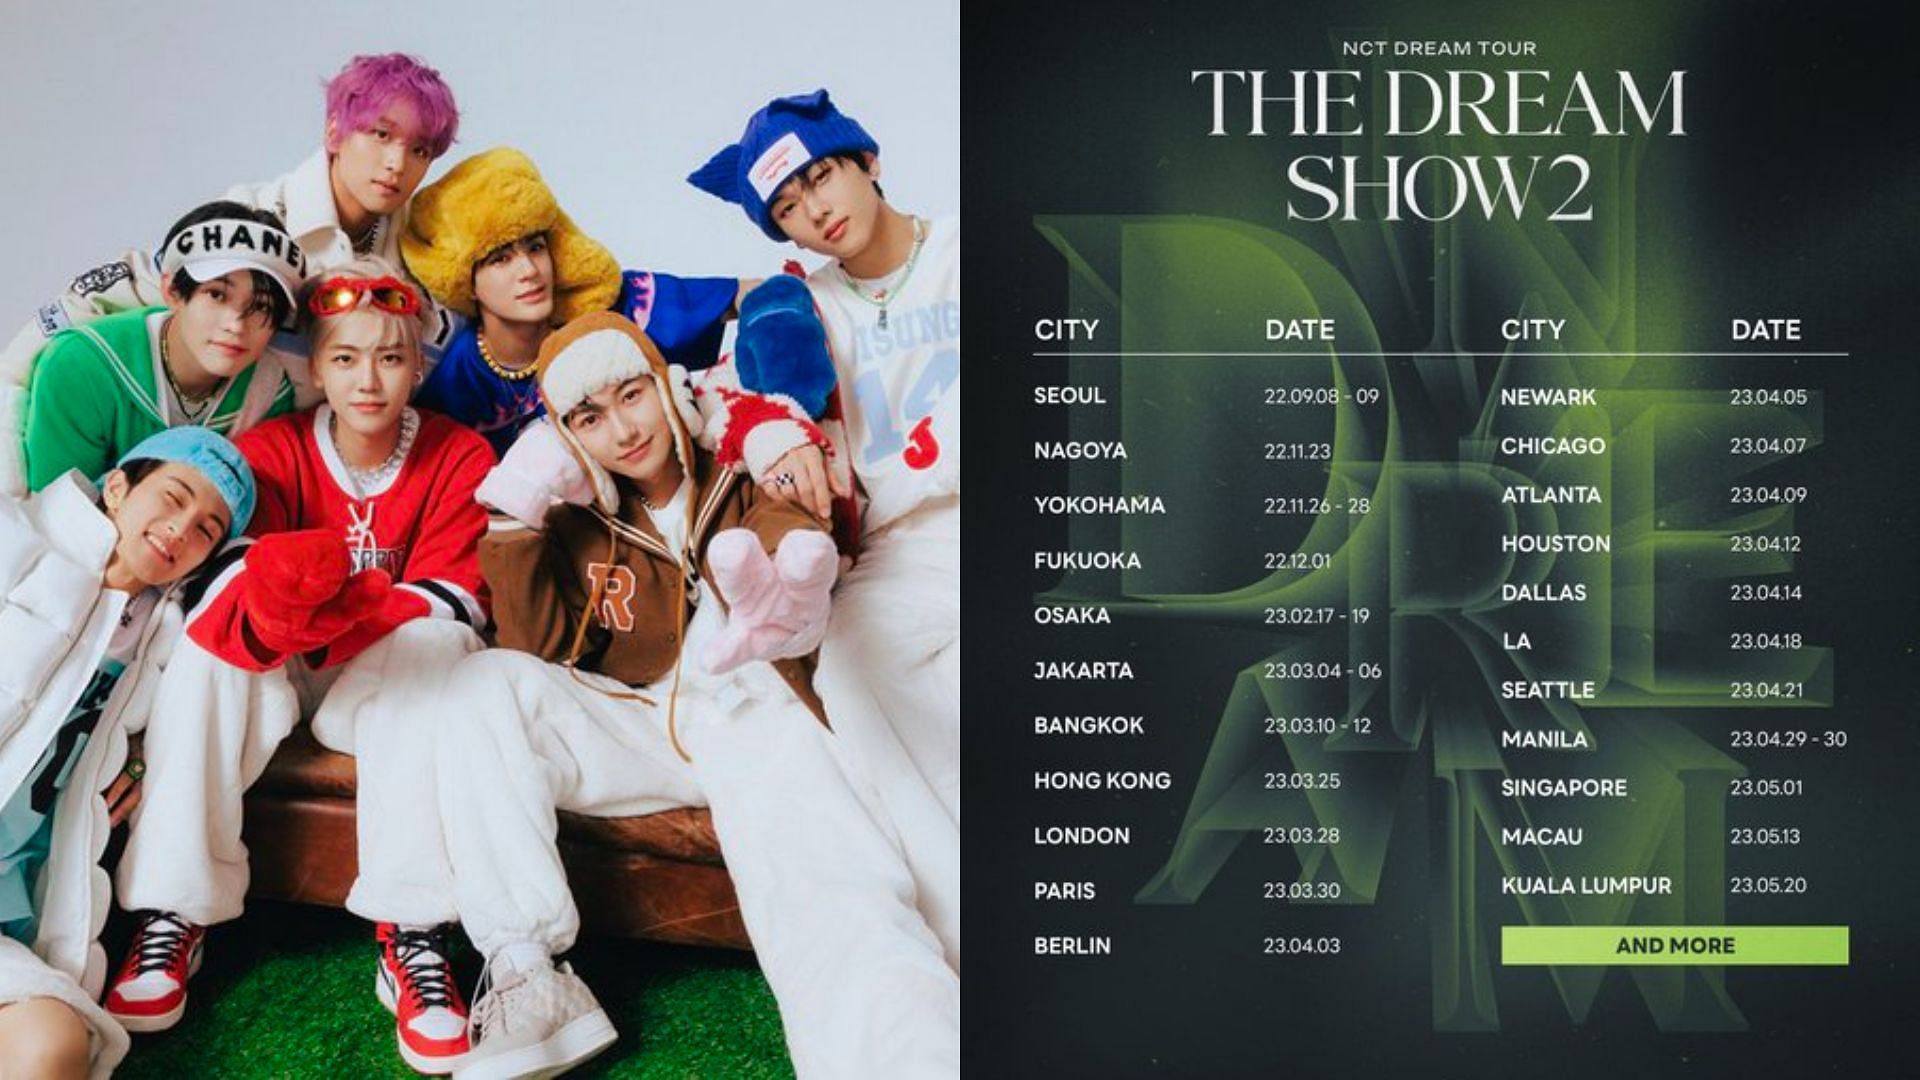 NCT Dream announced U.S., Europe and Asia tour dates and cities (Image via Twitter/@NCTsmtown_DREAM)